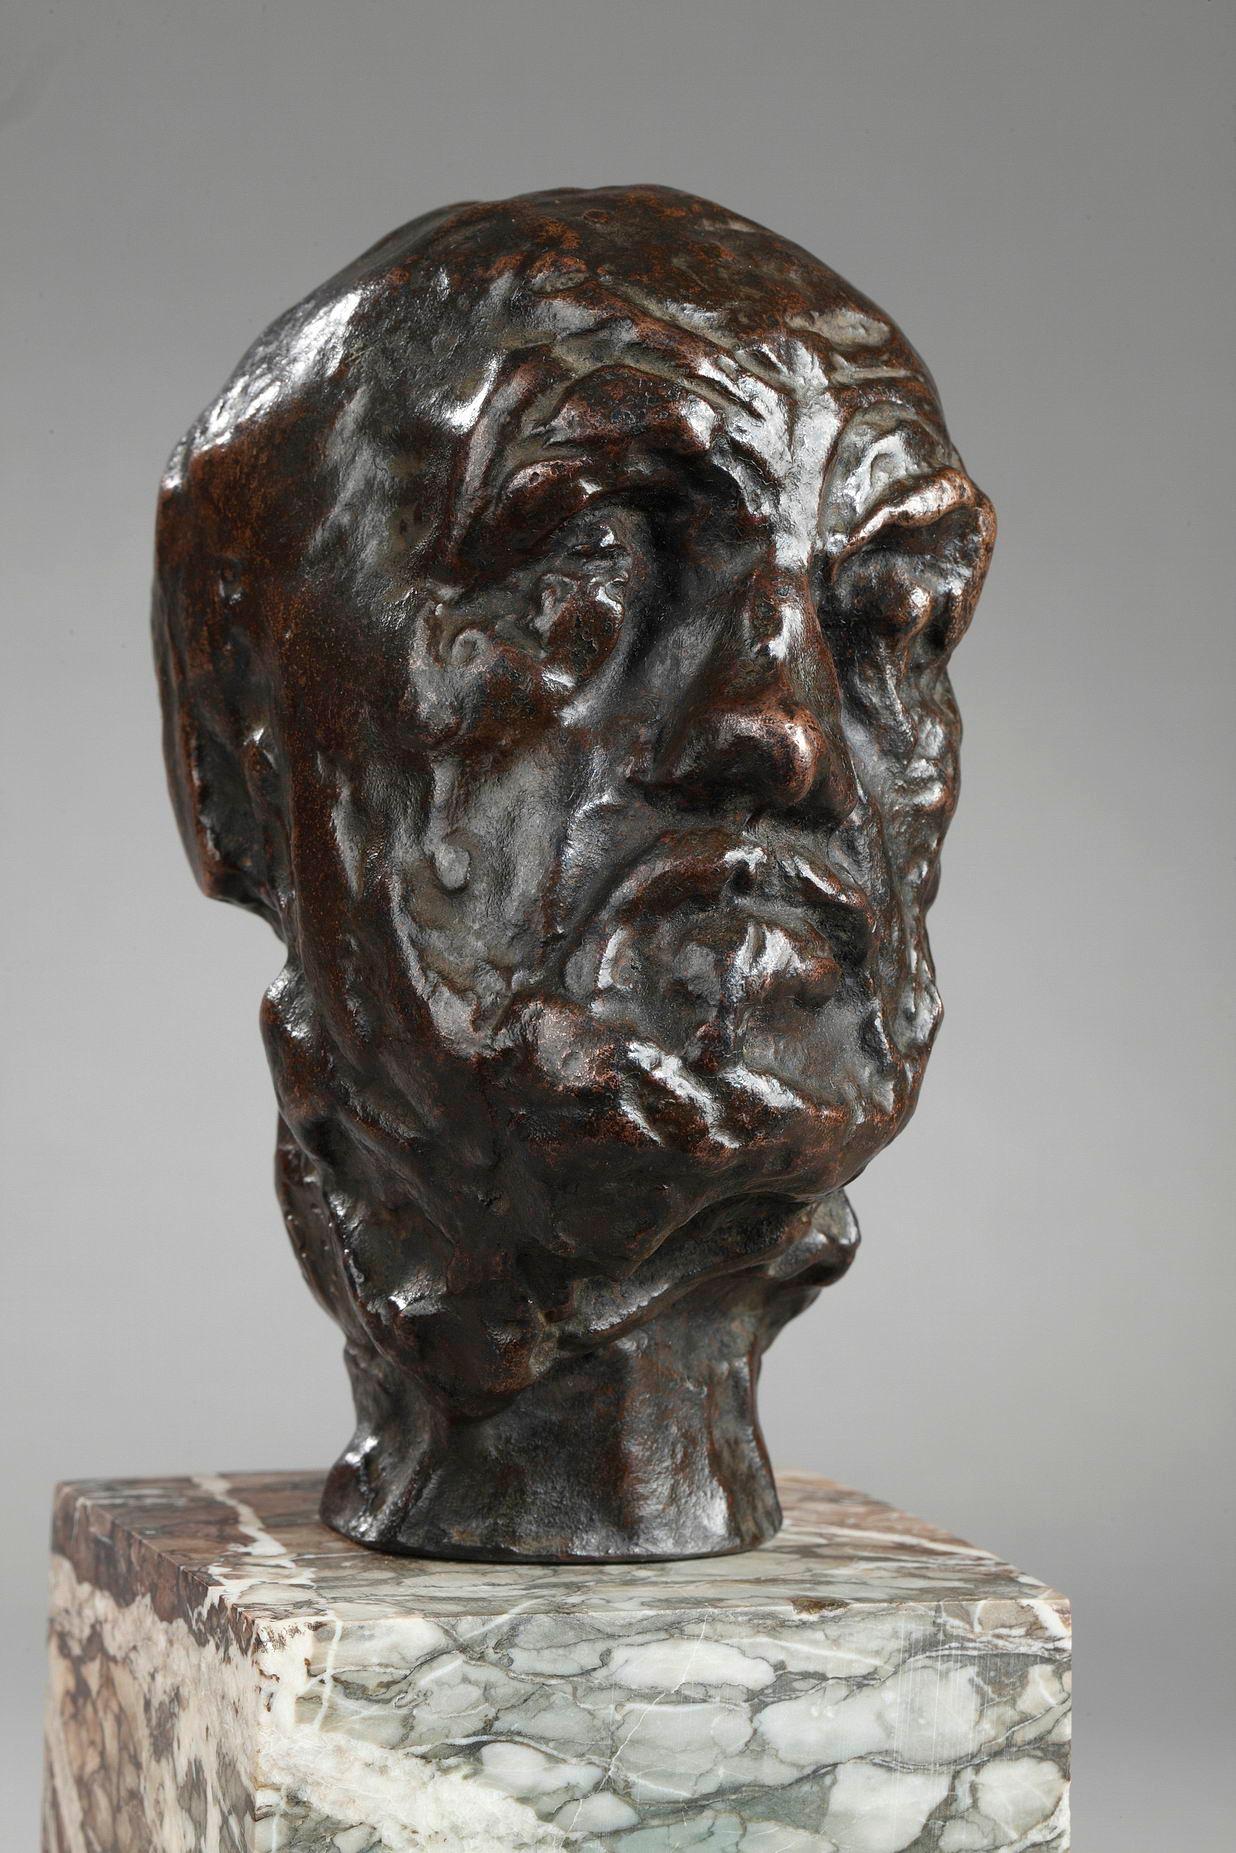 Petite tête de l'Homme au nez cassé
Small head of the Man with the broken nose
by Auguste RODIN (1840-1917)
Sketch for the Gates of Hell
Variant with symmetric neck

Bronze with black-dark brown patina
Signed 